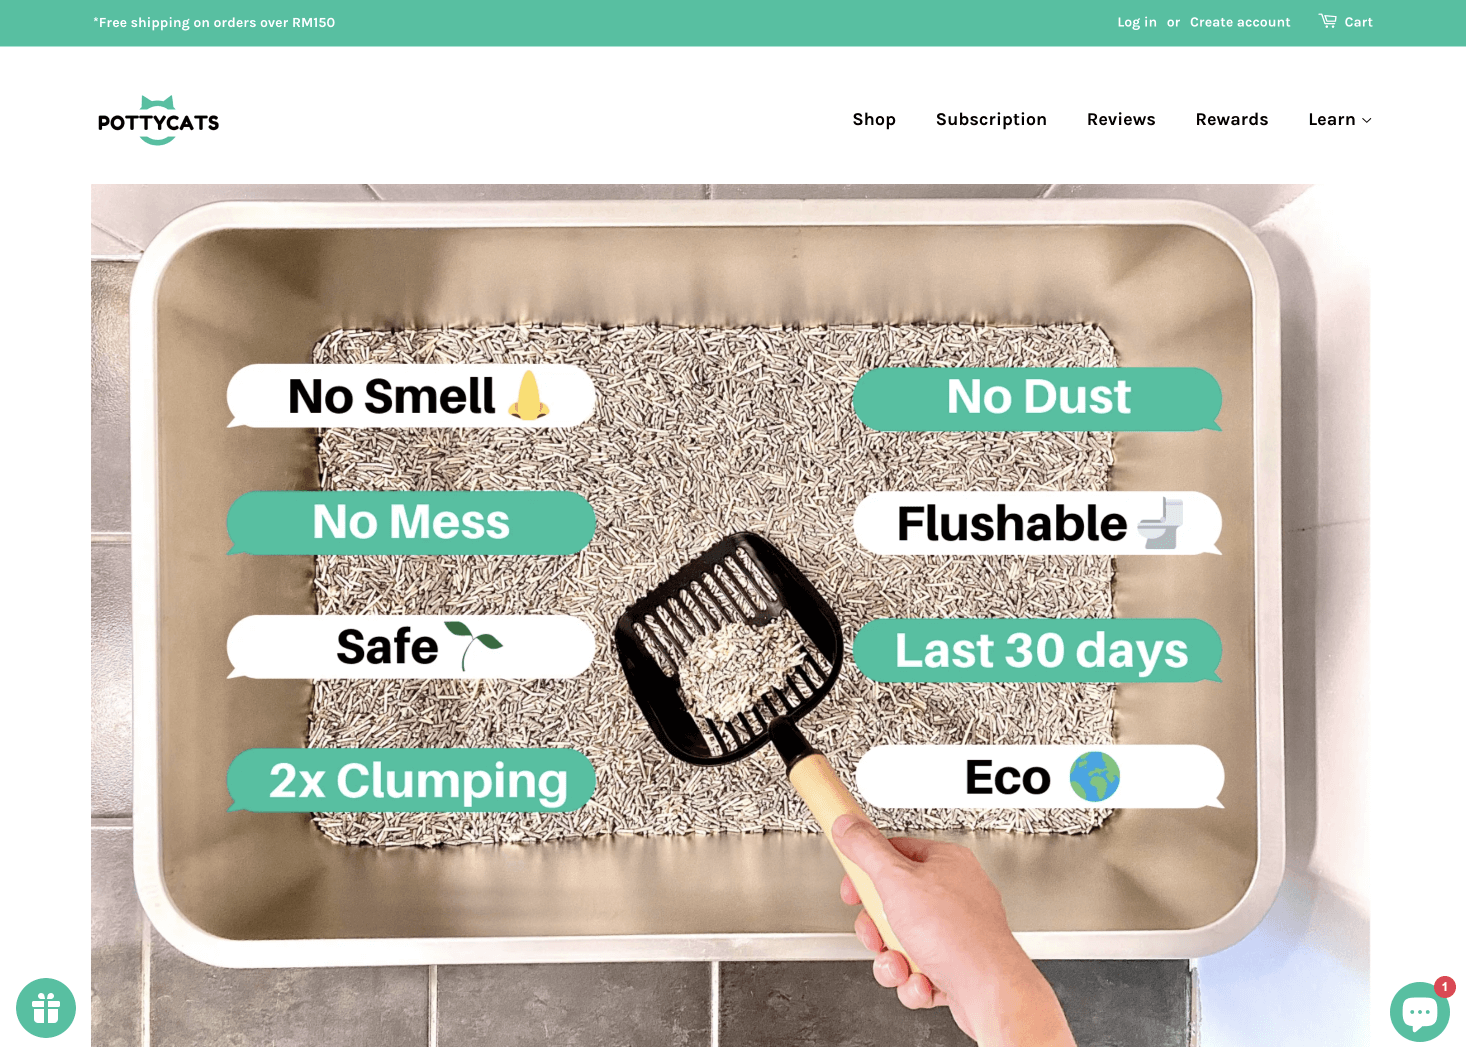 A screenshot from Pottycat’s homepage showing its cat litter with the following benefits highlighted: no smell, no mess, safe, 2x clumping, no dust, flushable, last 30 days, and eco-friendly. 